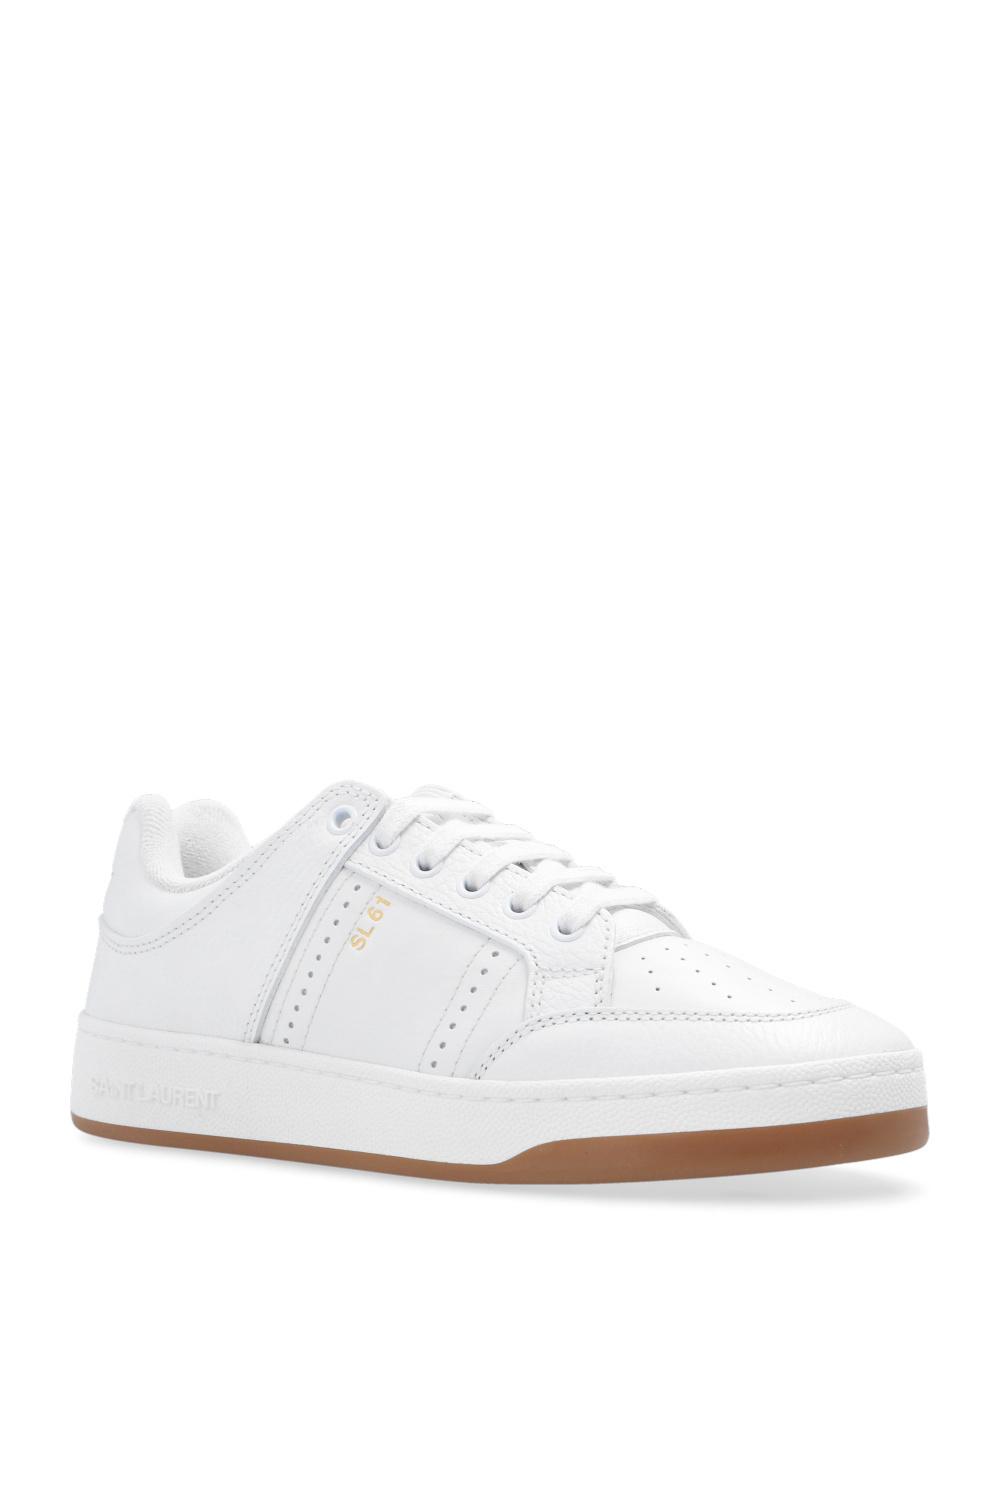 Saint Laurent Leather 'sl/61' Sneakers in White - Lyst